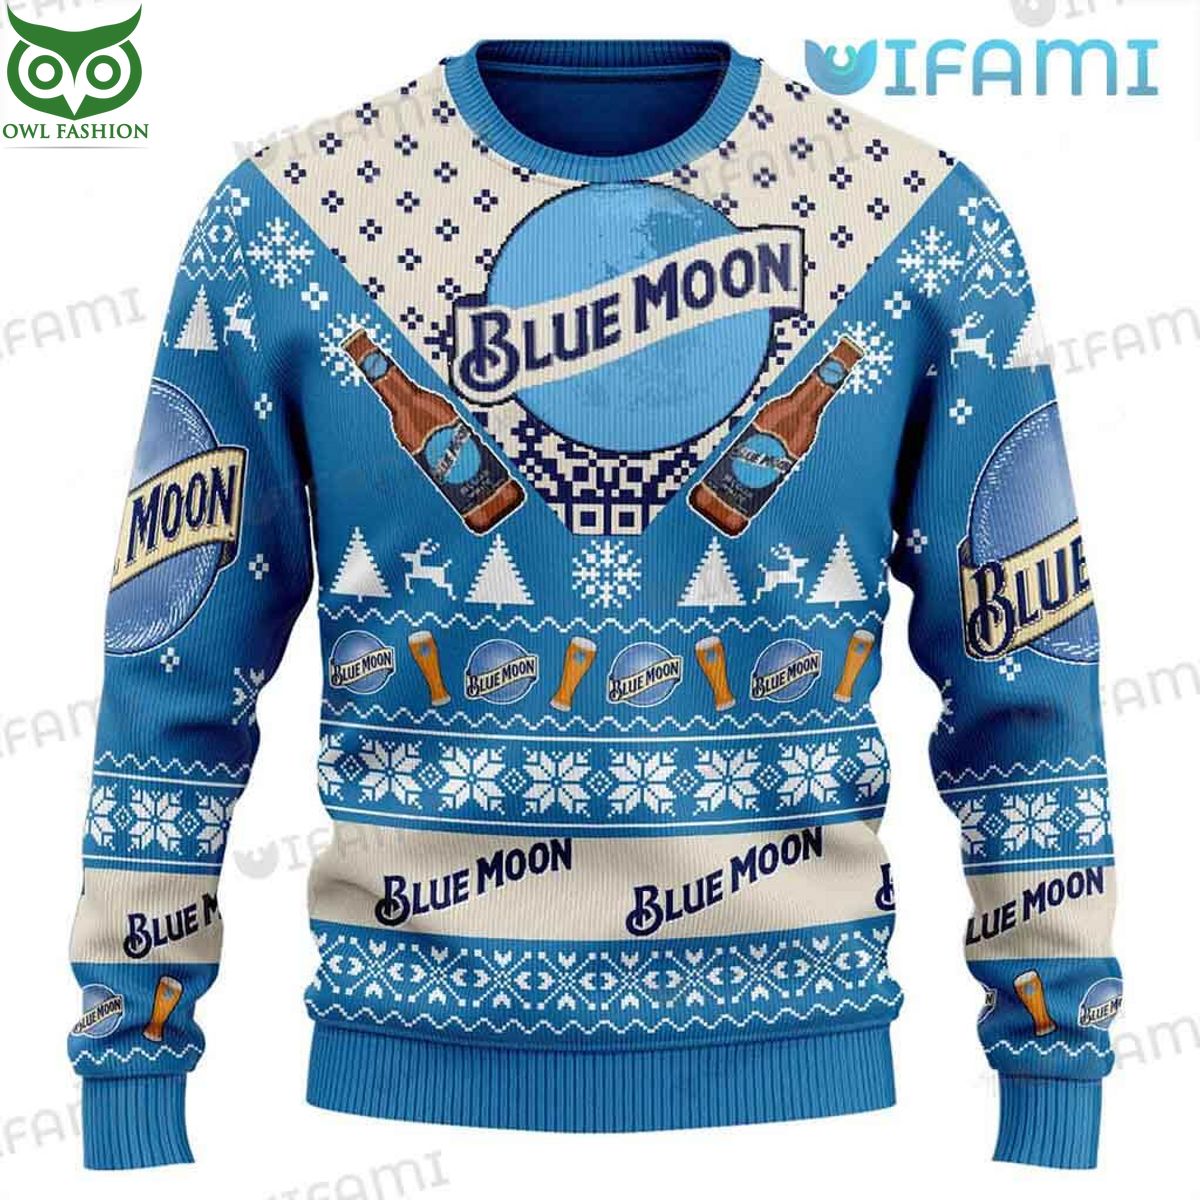 blue moon beer ugly sweater logo glass christmas gift for beer lovers 1 up6Rc.jpg